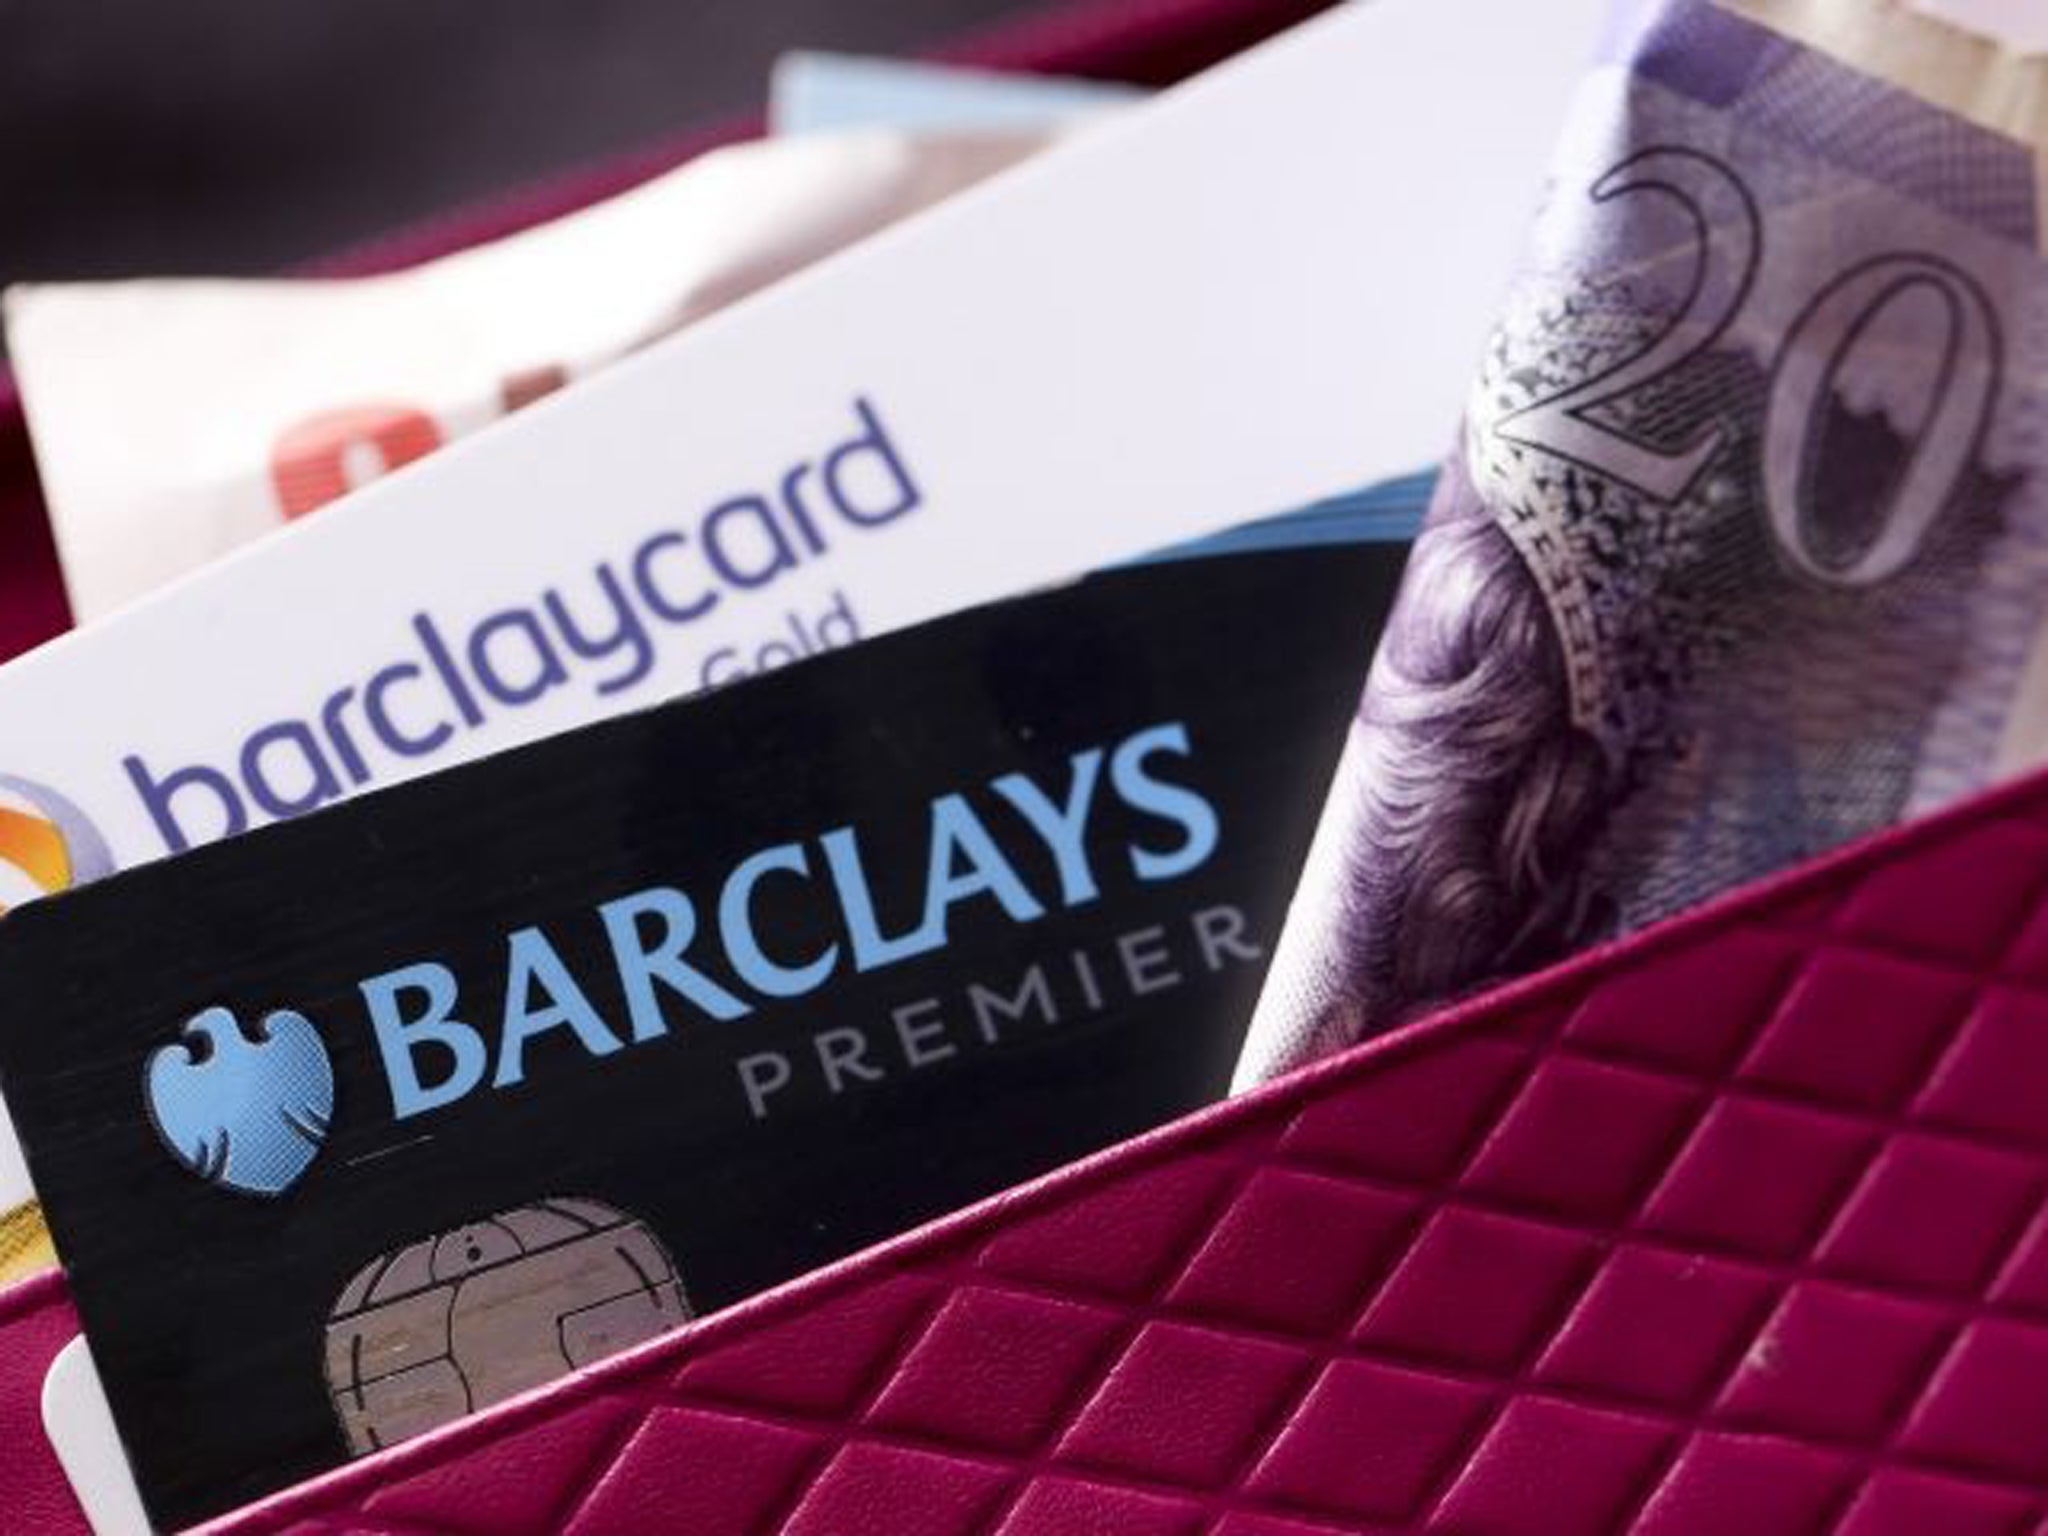 Barclaycard, one of the UK's largest credit-card providers, now reveals all its rates to potential customers